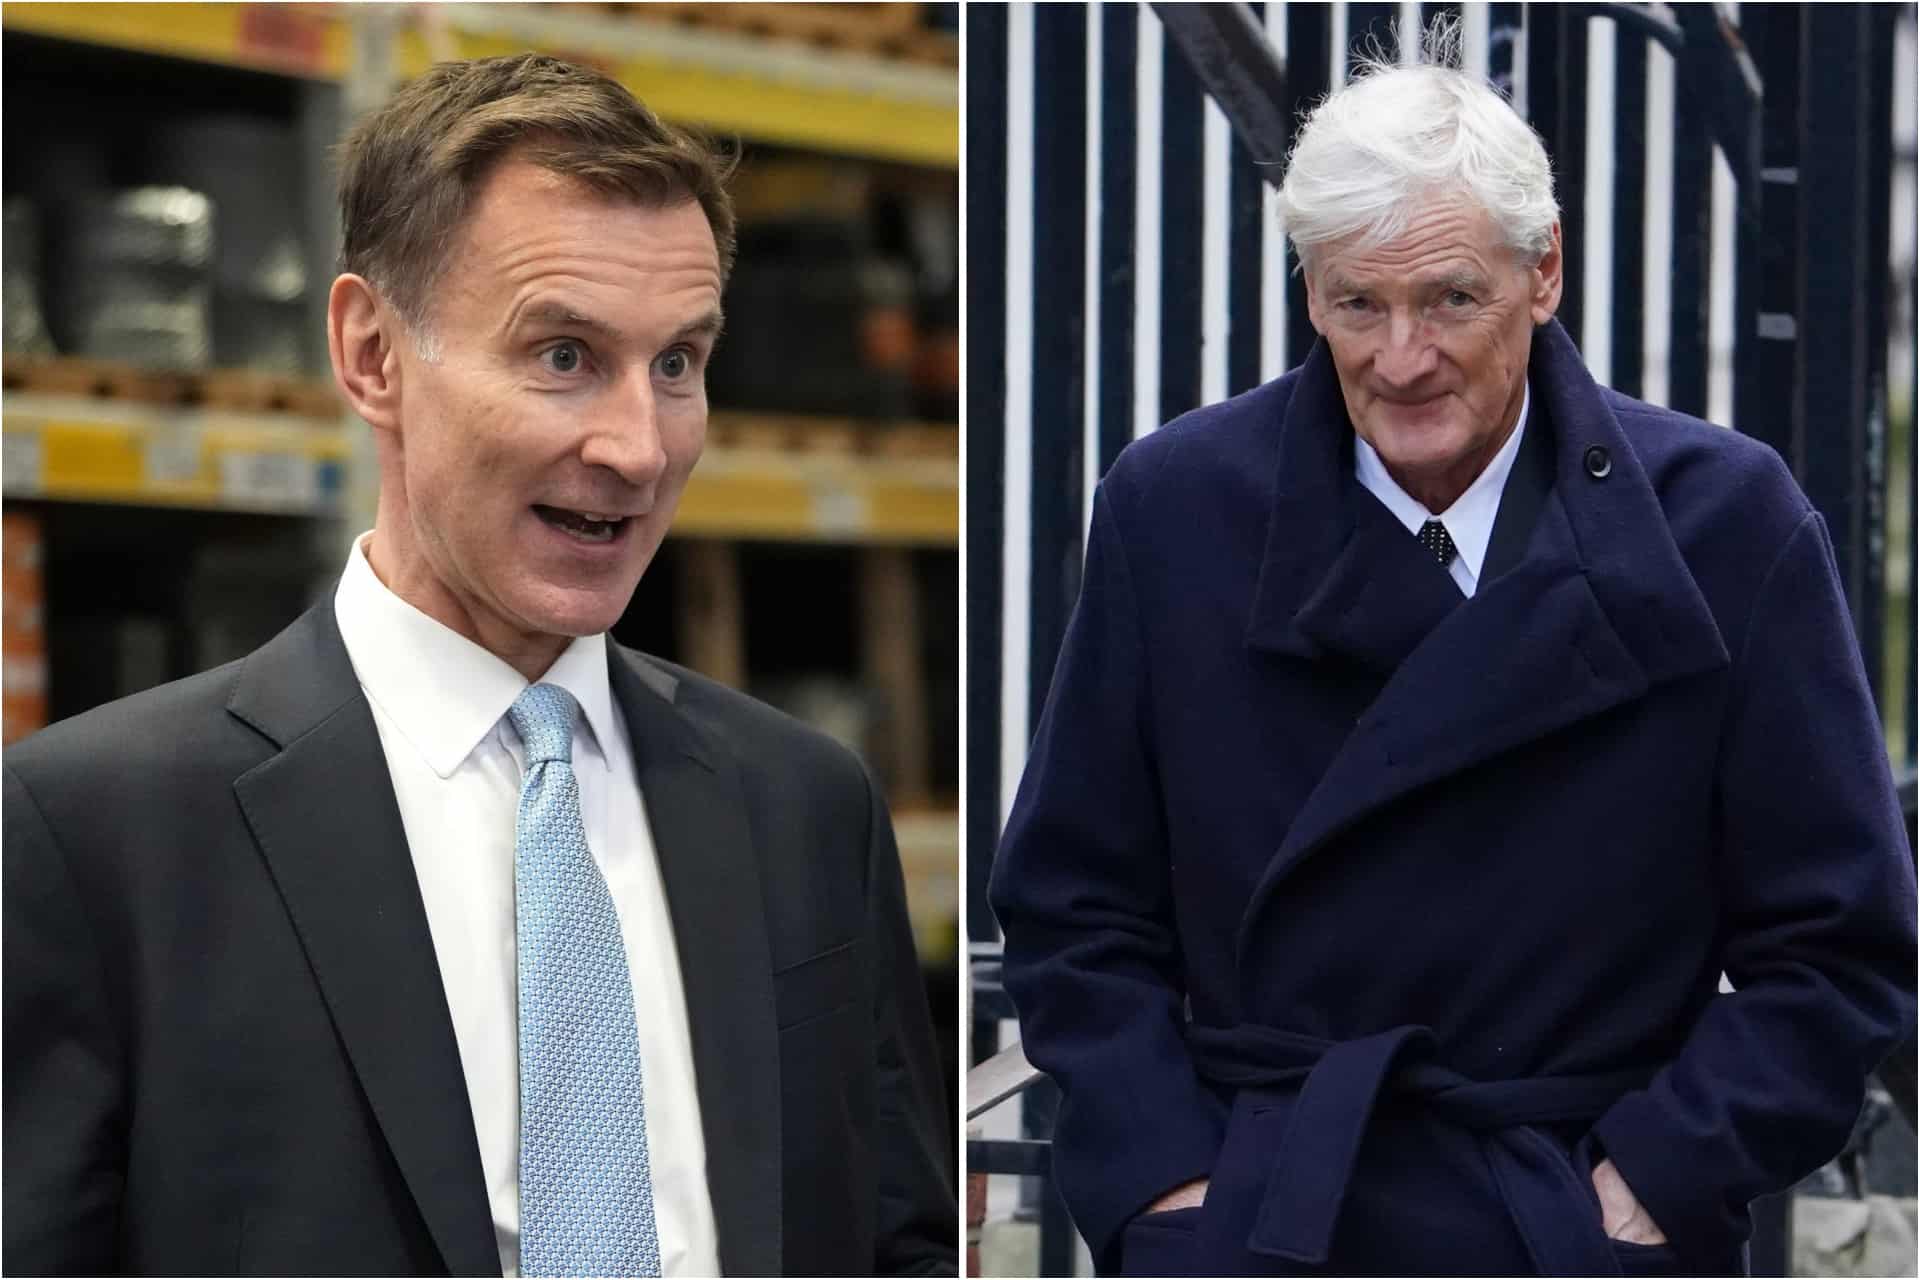 Details of James Dyson’s fiery meeting with Jeremy Hunt emerge